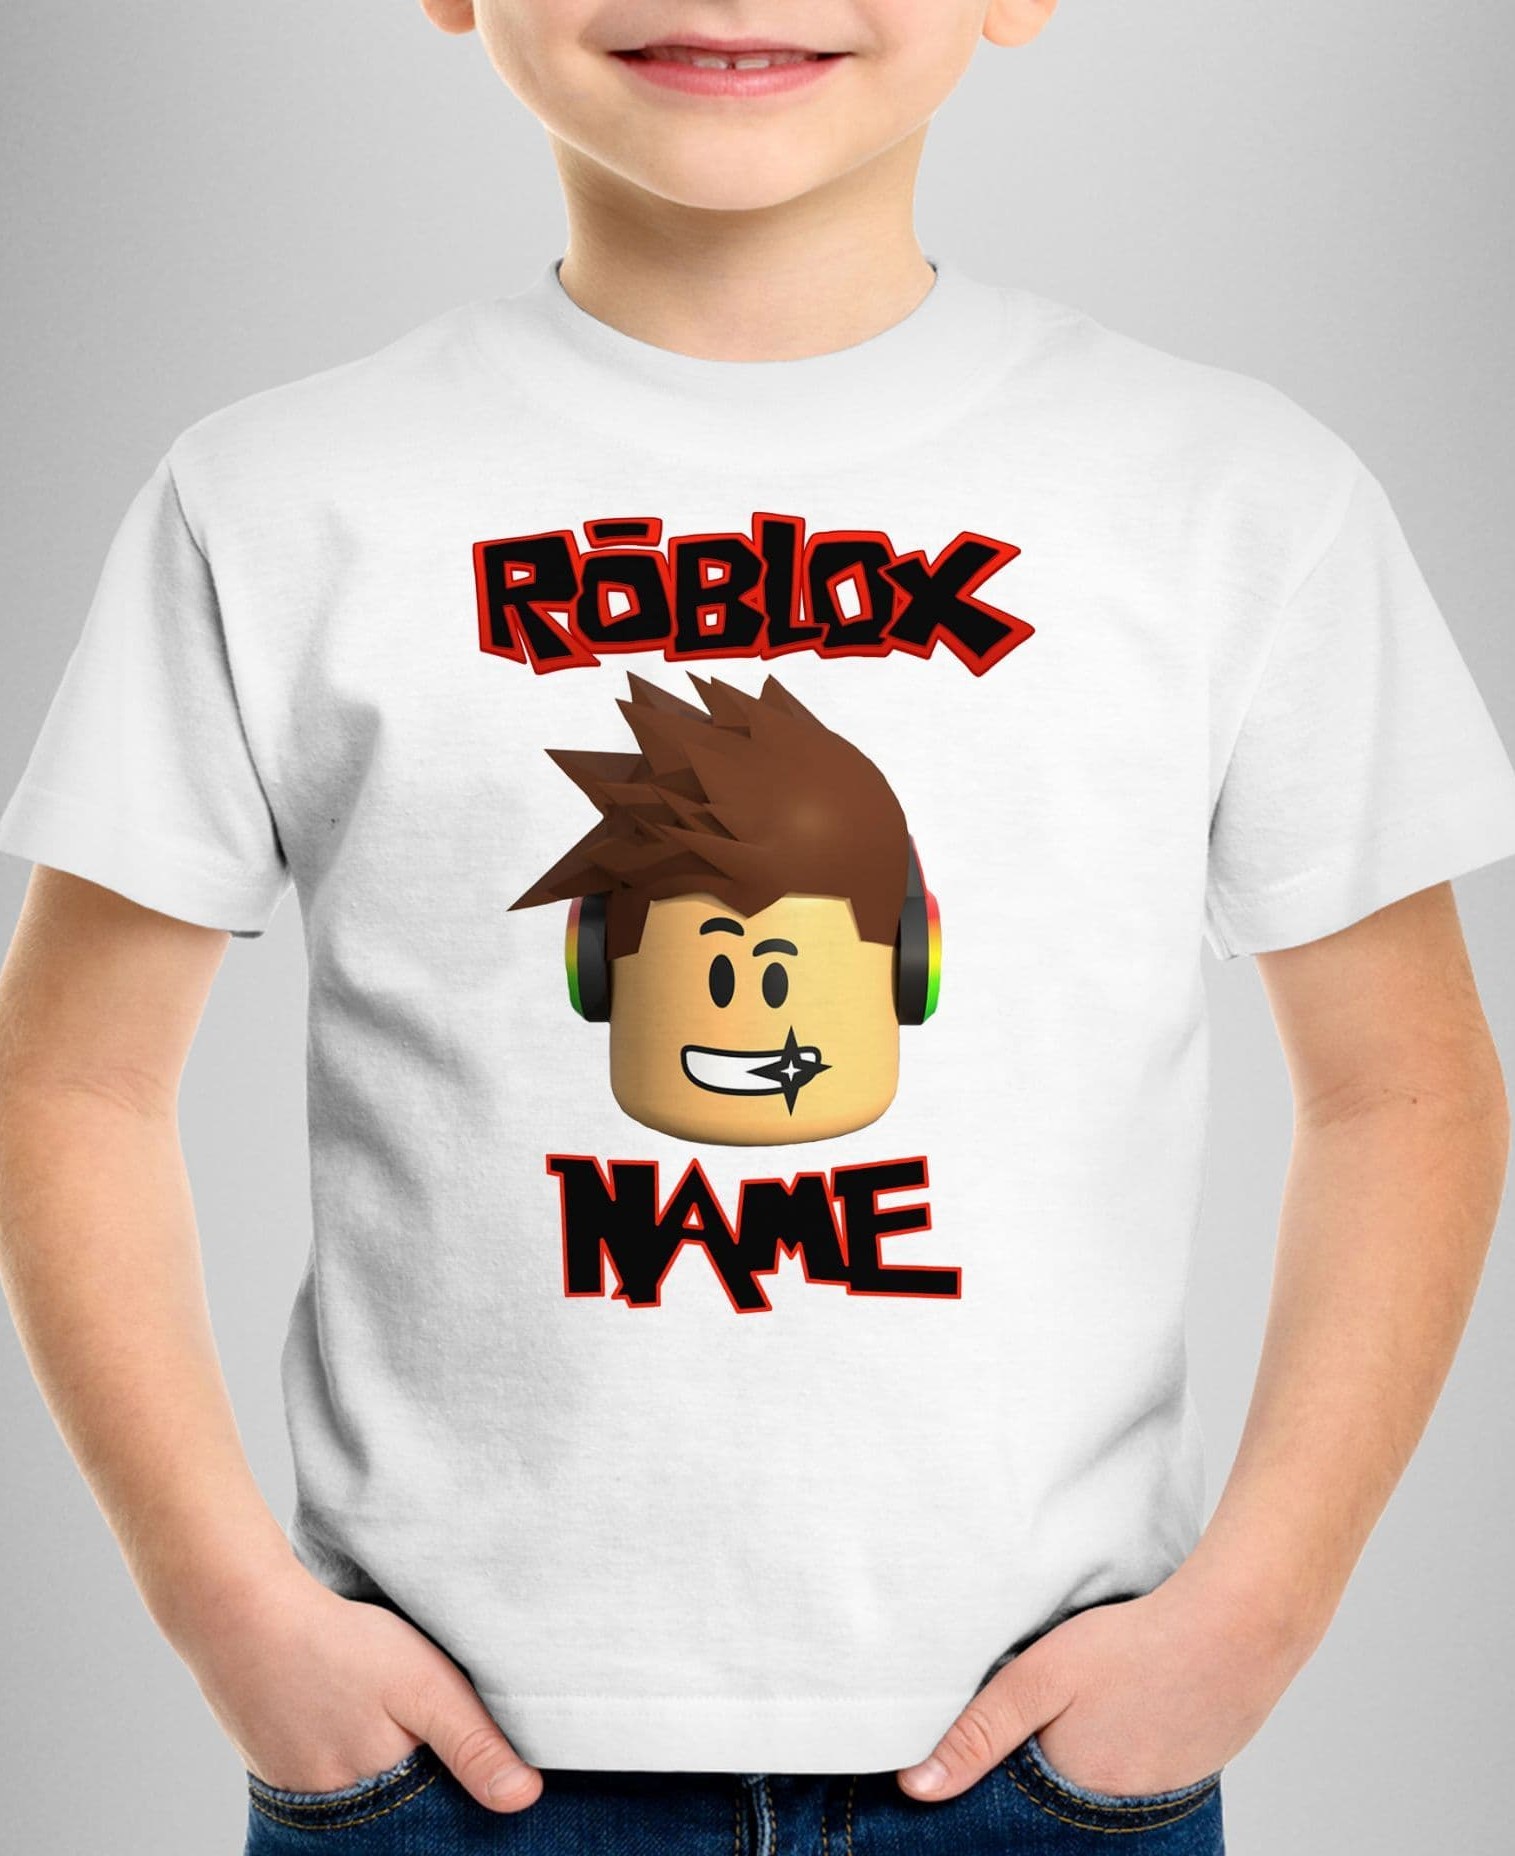 how to make a roblox t shirt